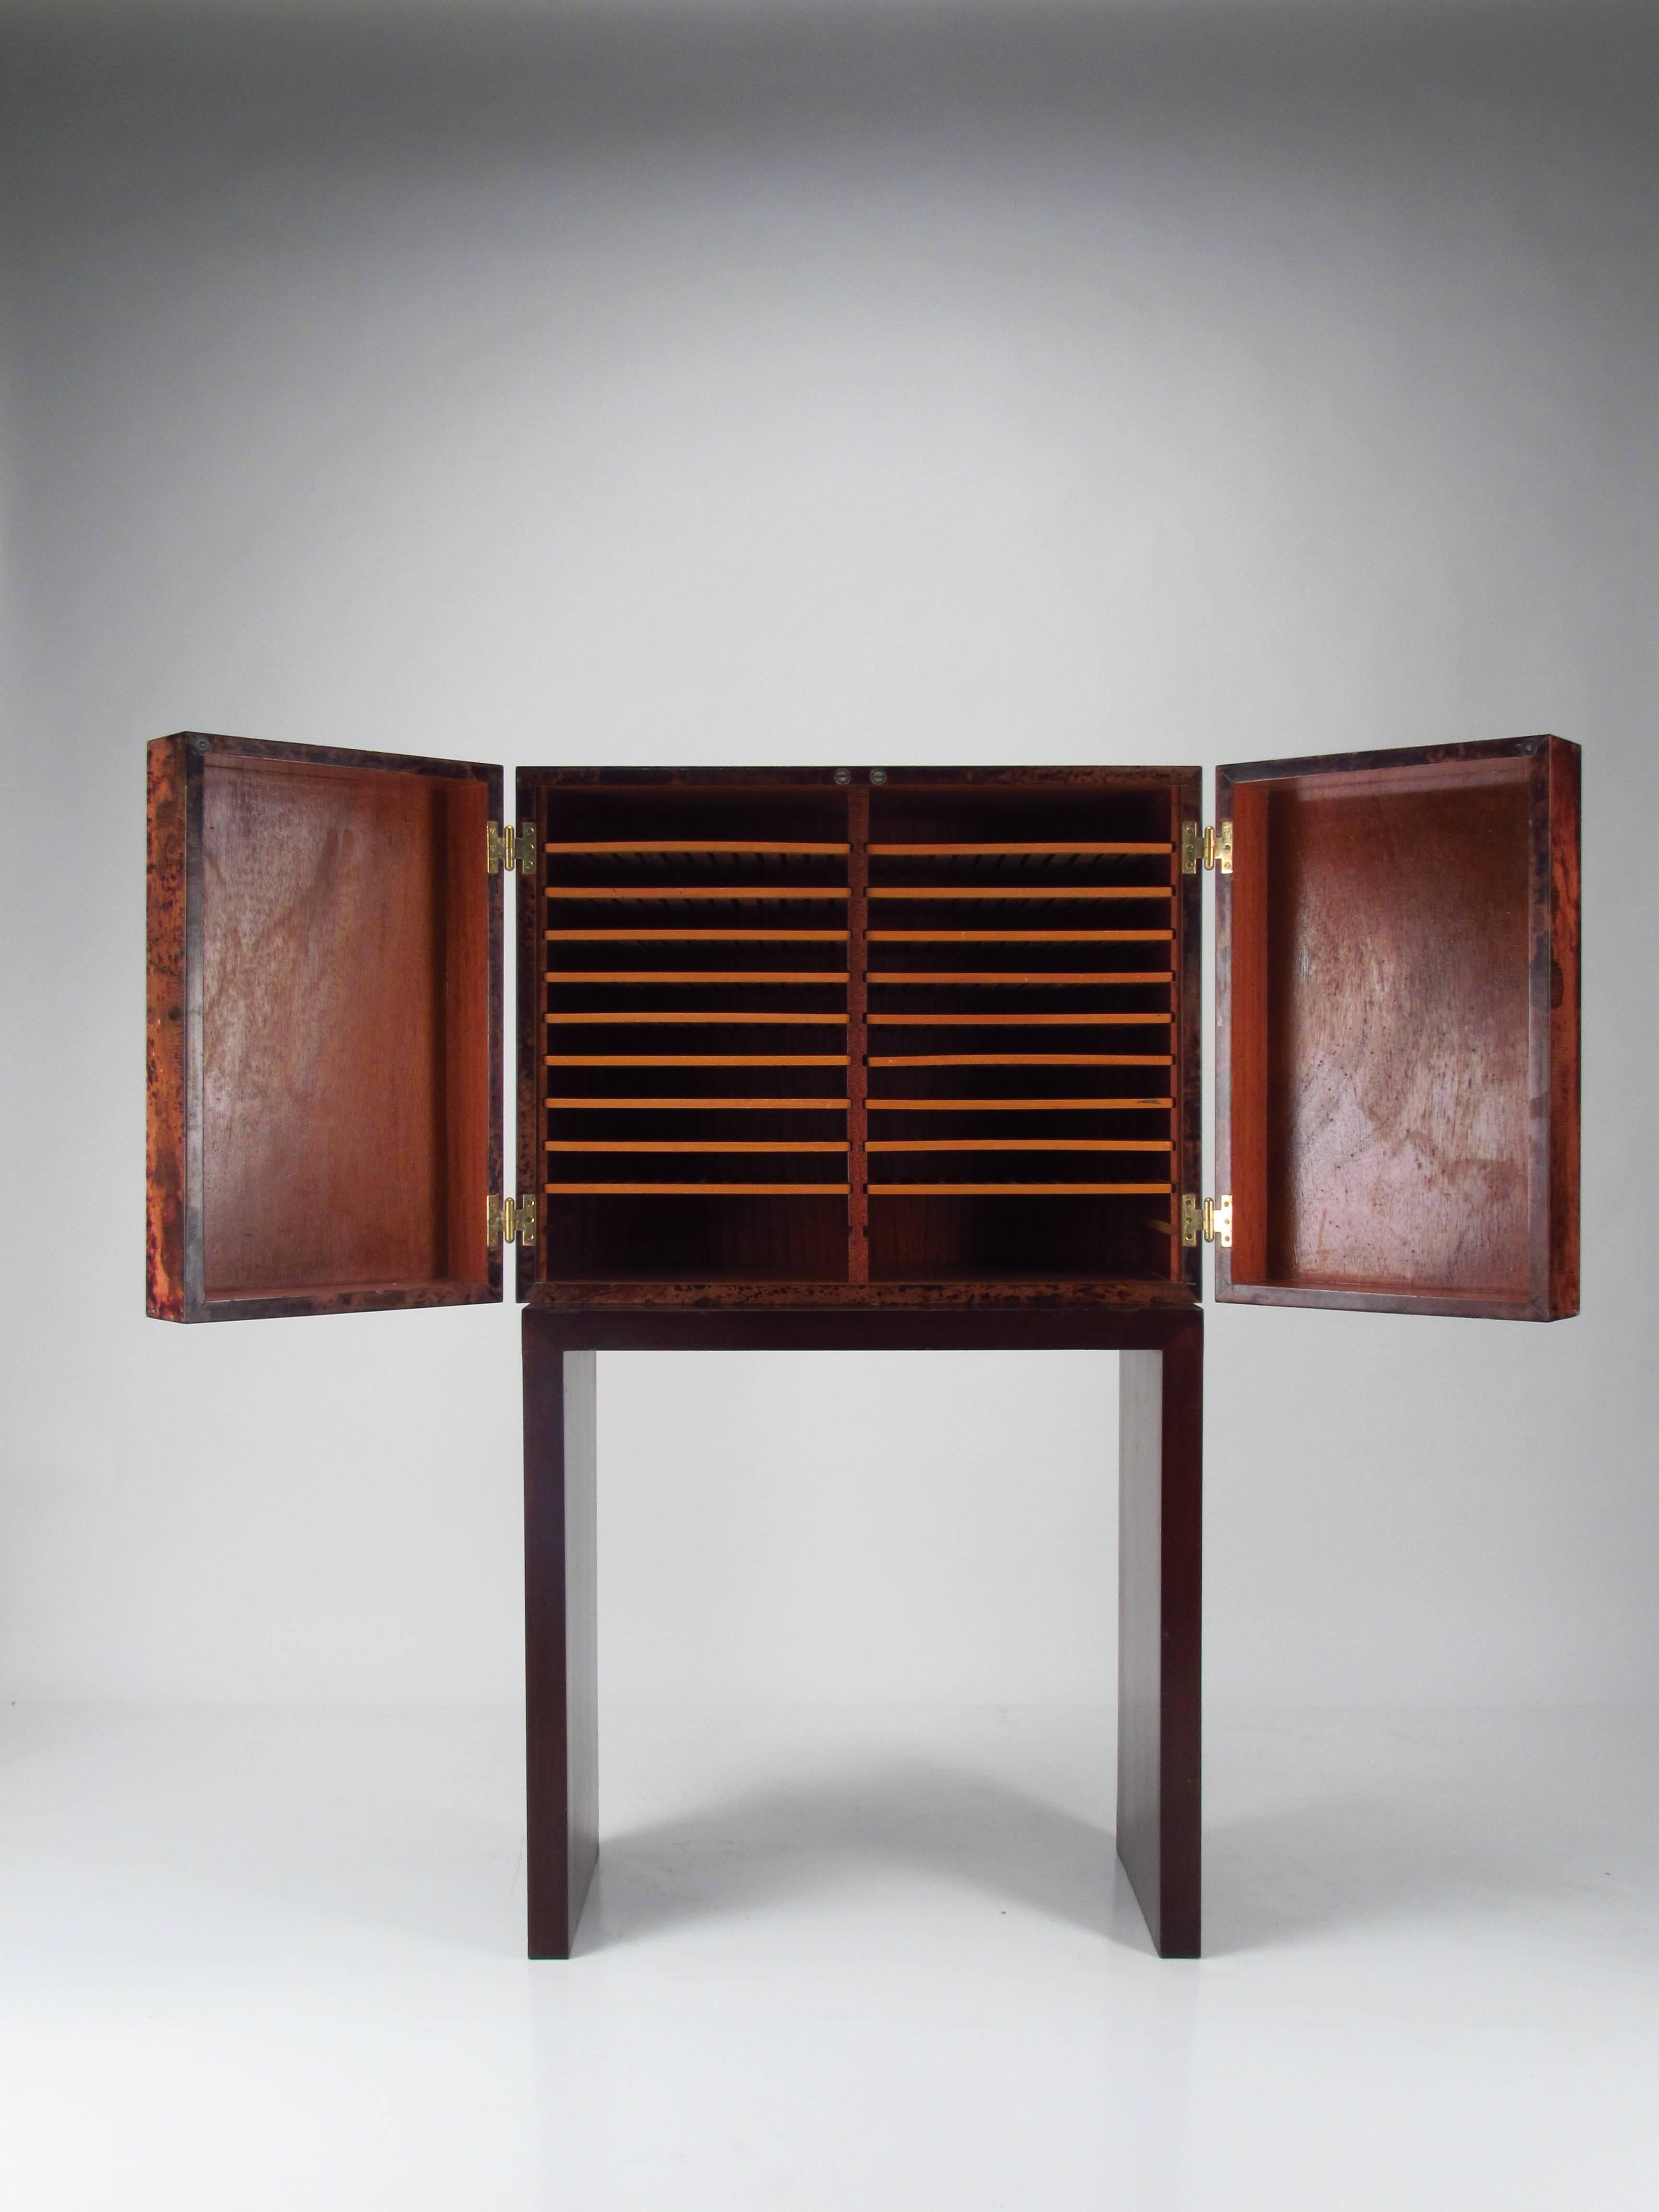 Aldo Tura Lacquered Goatskin Cabinet made in Italy in the 1950s. Originally designed as a humidor (but not used as one) this cabinet also makes a superb magazine rack, a place to store important papers, or perhaps a chic storage cabinet for fashion